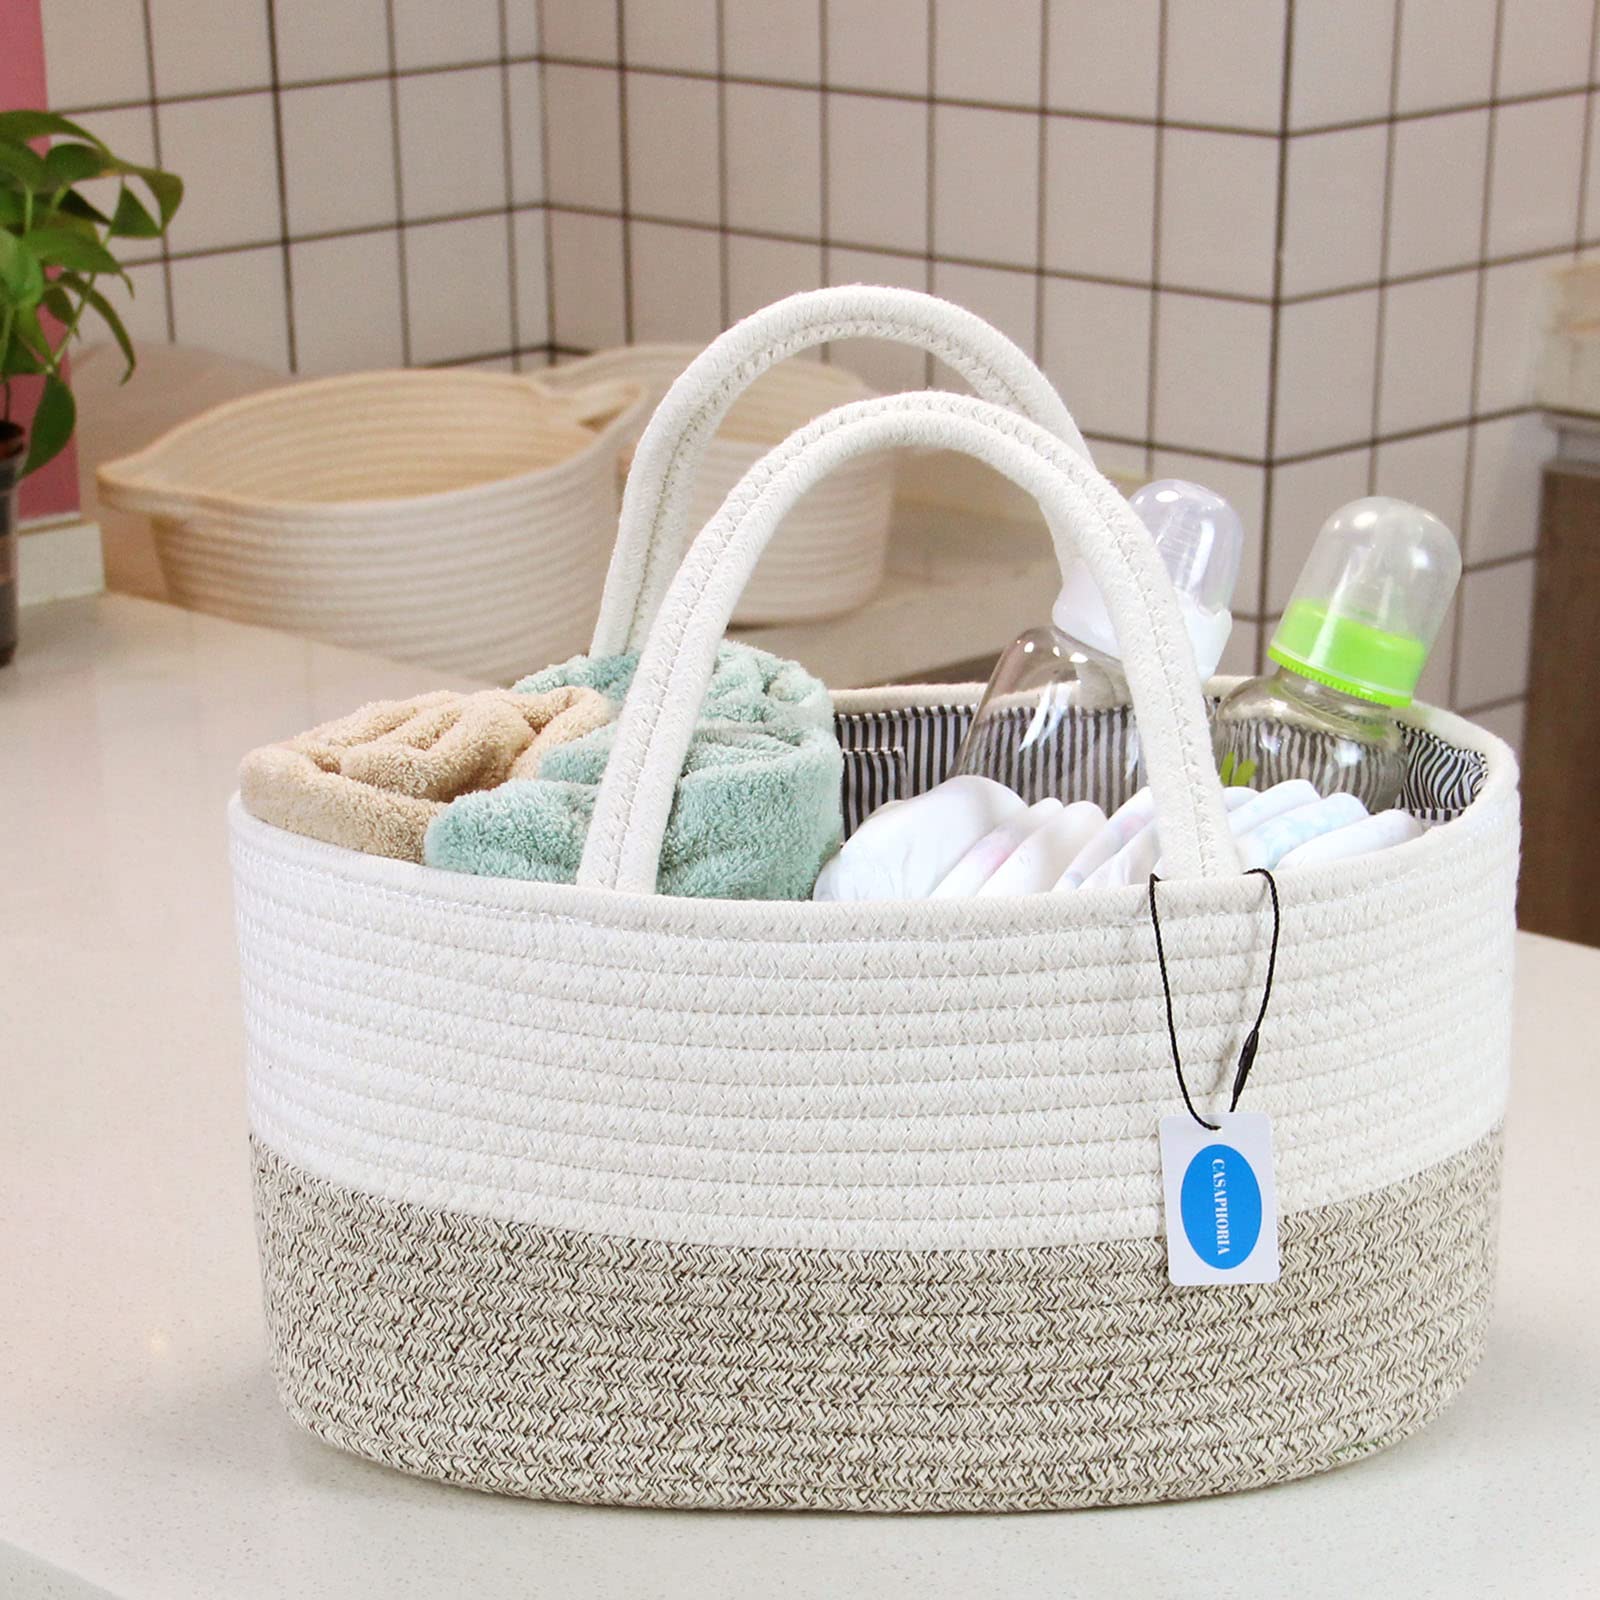 Casaphoria Diaper Caddy Organize,Cotton Rope Diaper Basket Caddy Baskets for Storage,100% Cotton Car Diaper Organizer with Removable Inserts,light brown(14.2''×8.7''×7.1'')